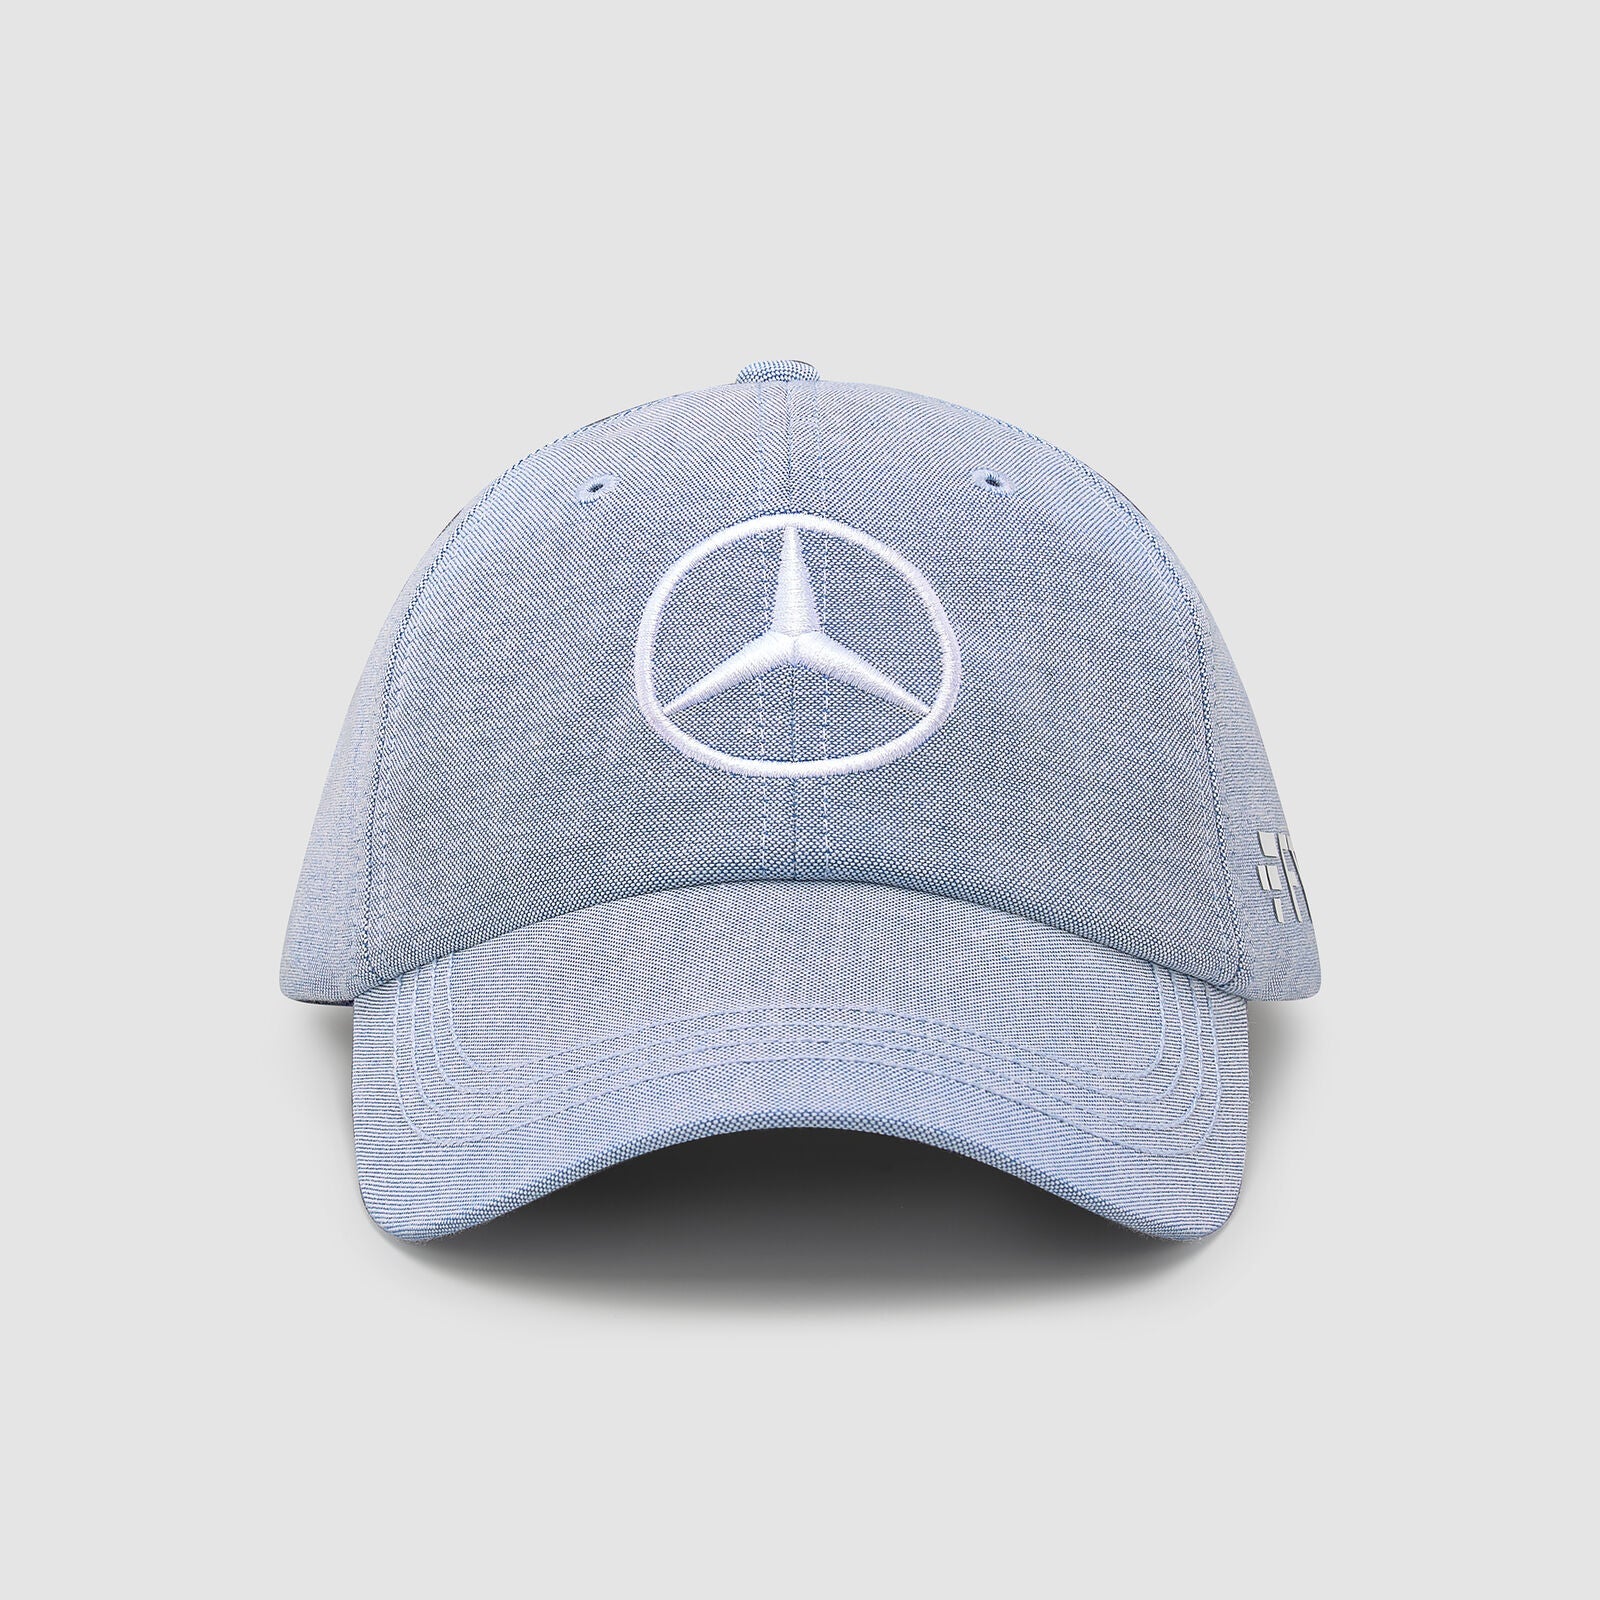 Mercedes 2022 George Russel Special Edition Cap